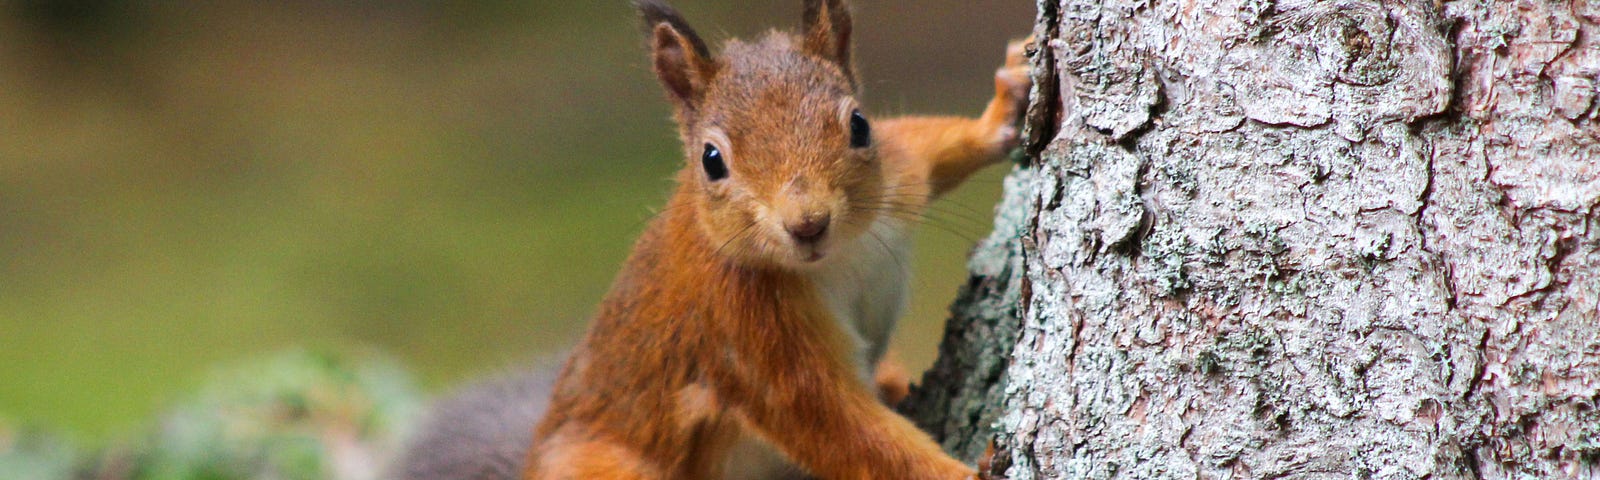 A red squirrel on the side of a tree, close up, looking into the camera